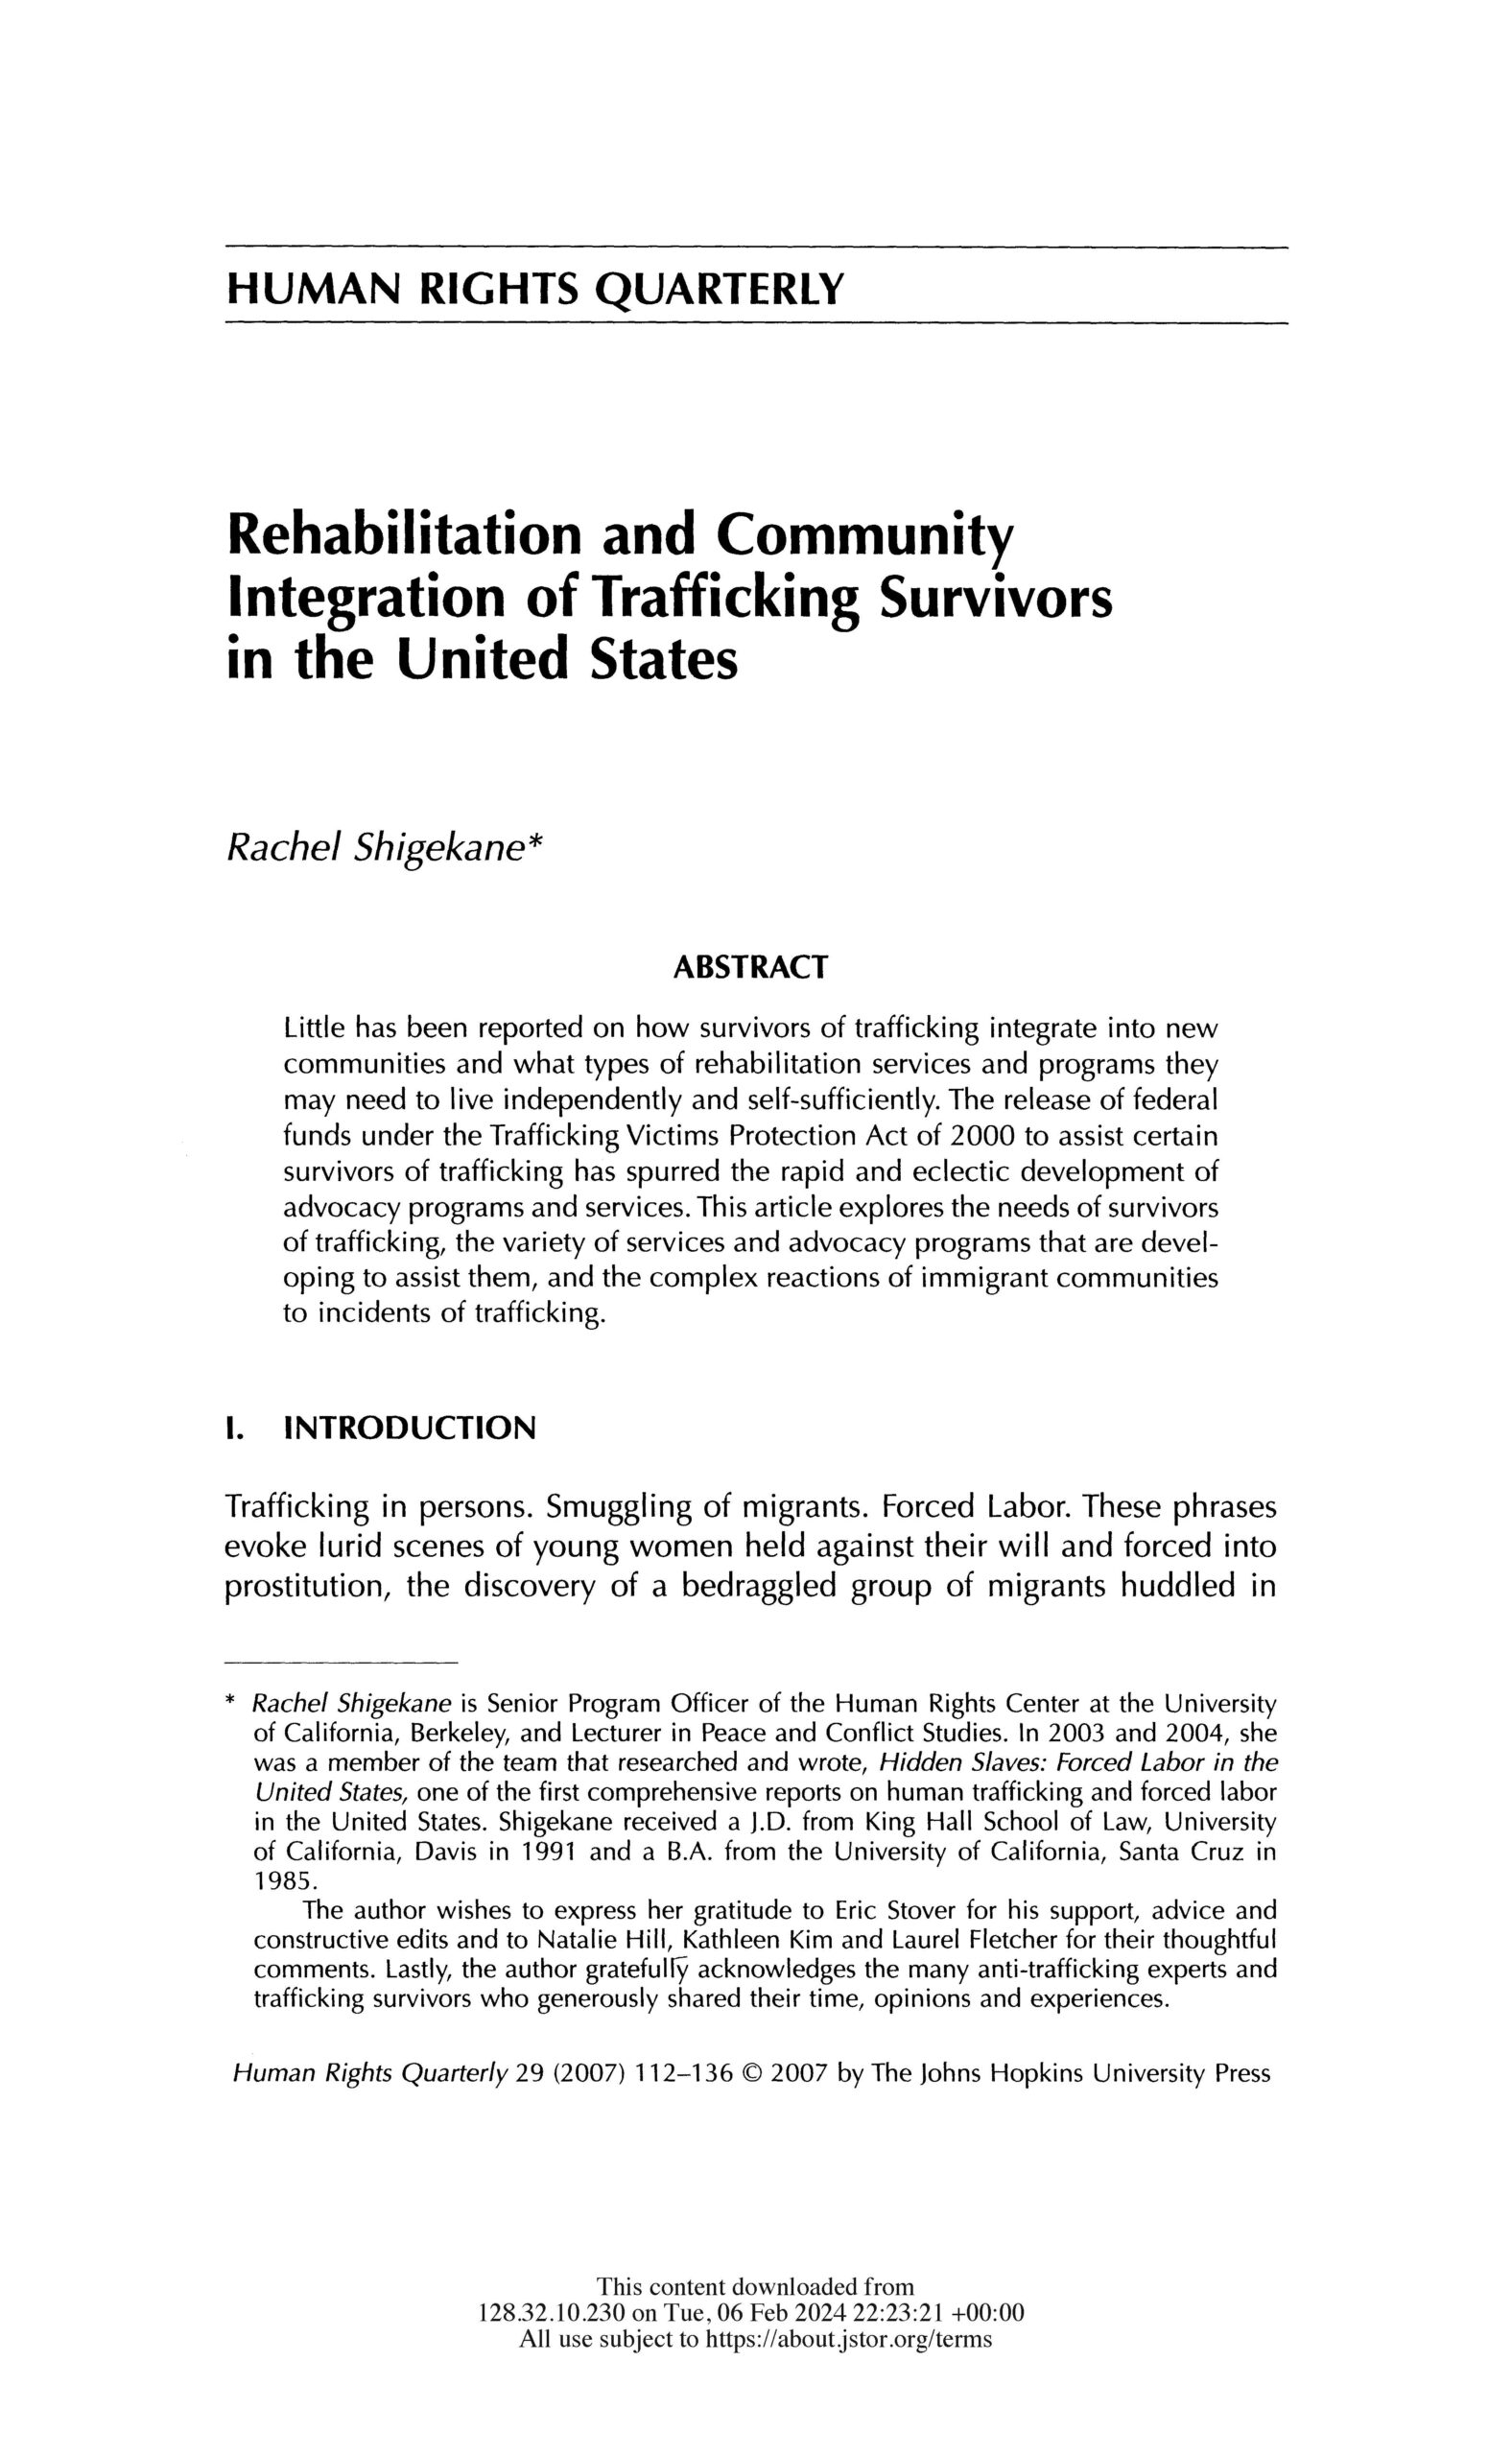 Rehabilitation and Community Integration of Trafficking Survivors in the United States